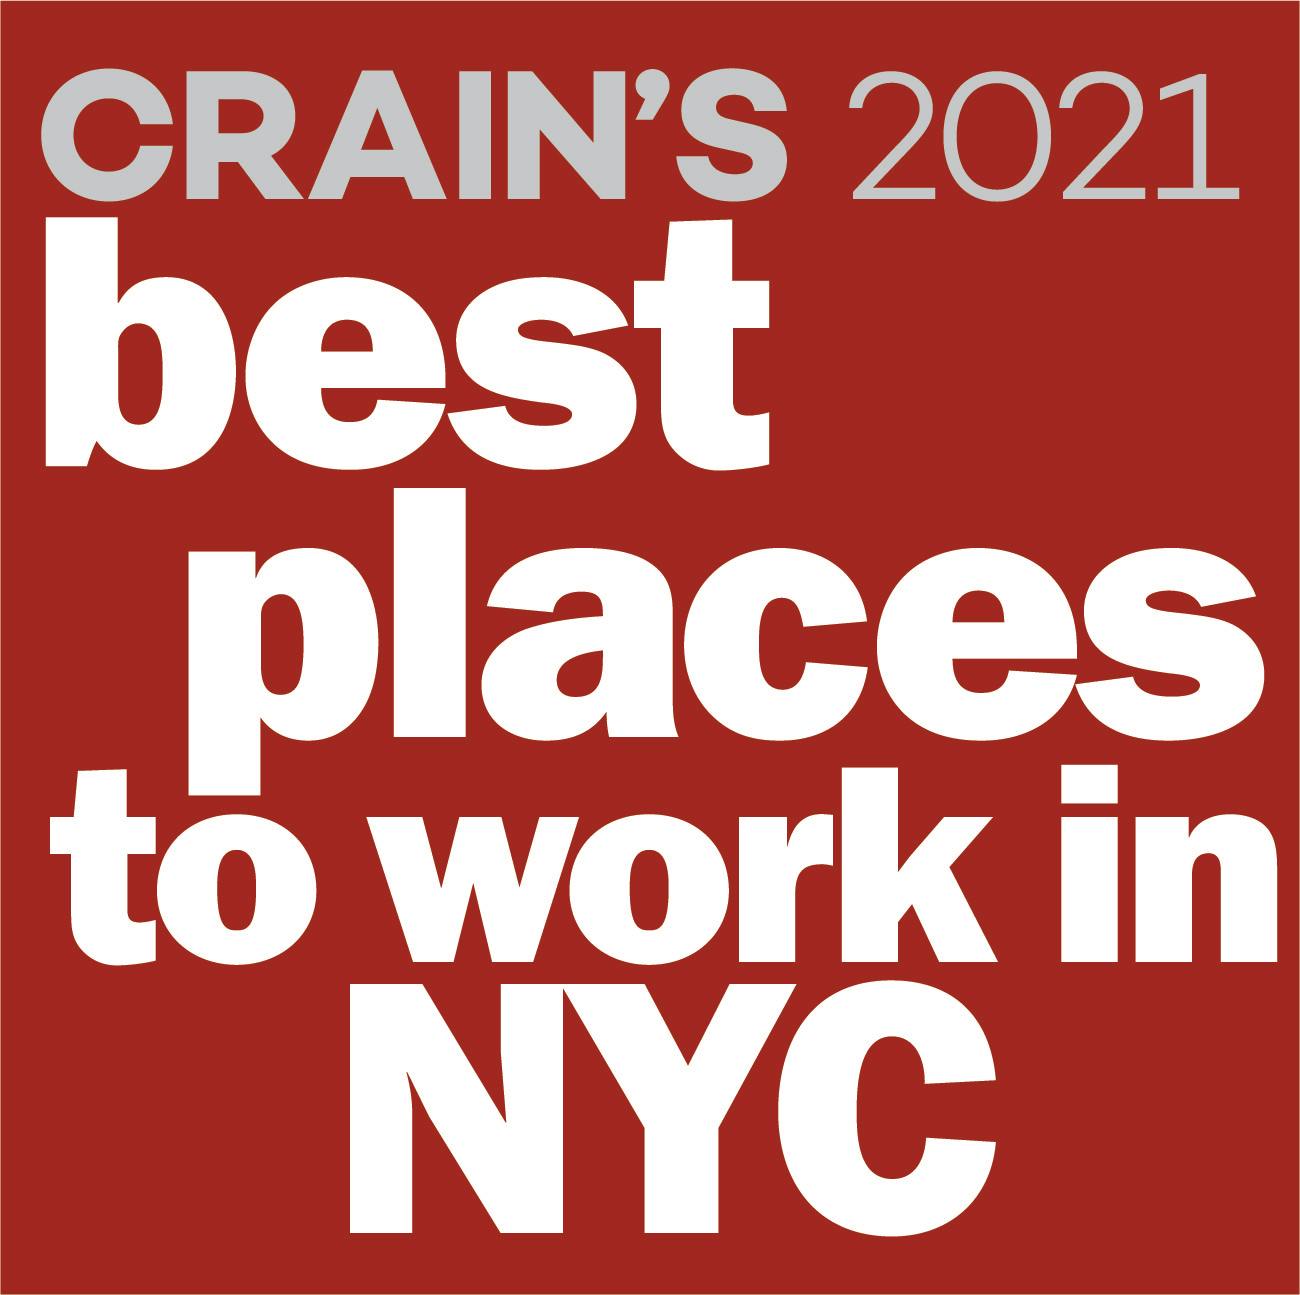 Crain's Best Places to Work in NYC 2021